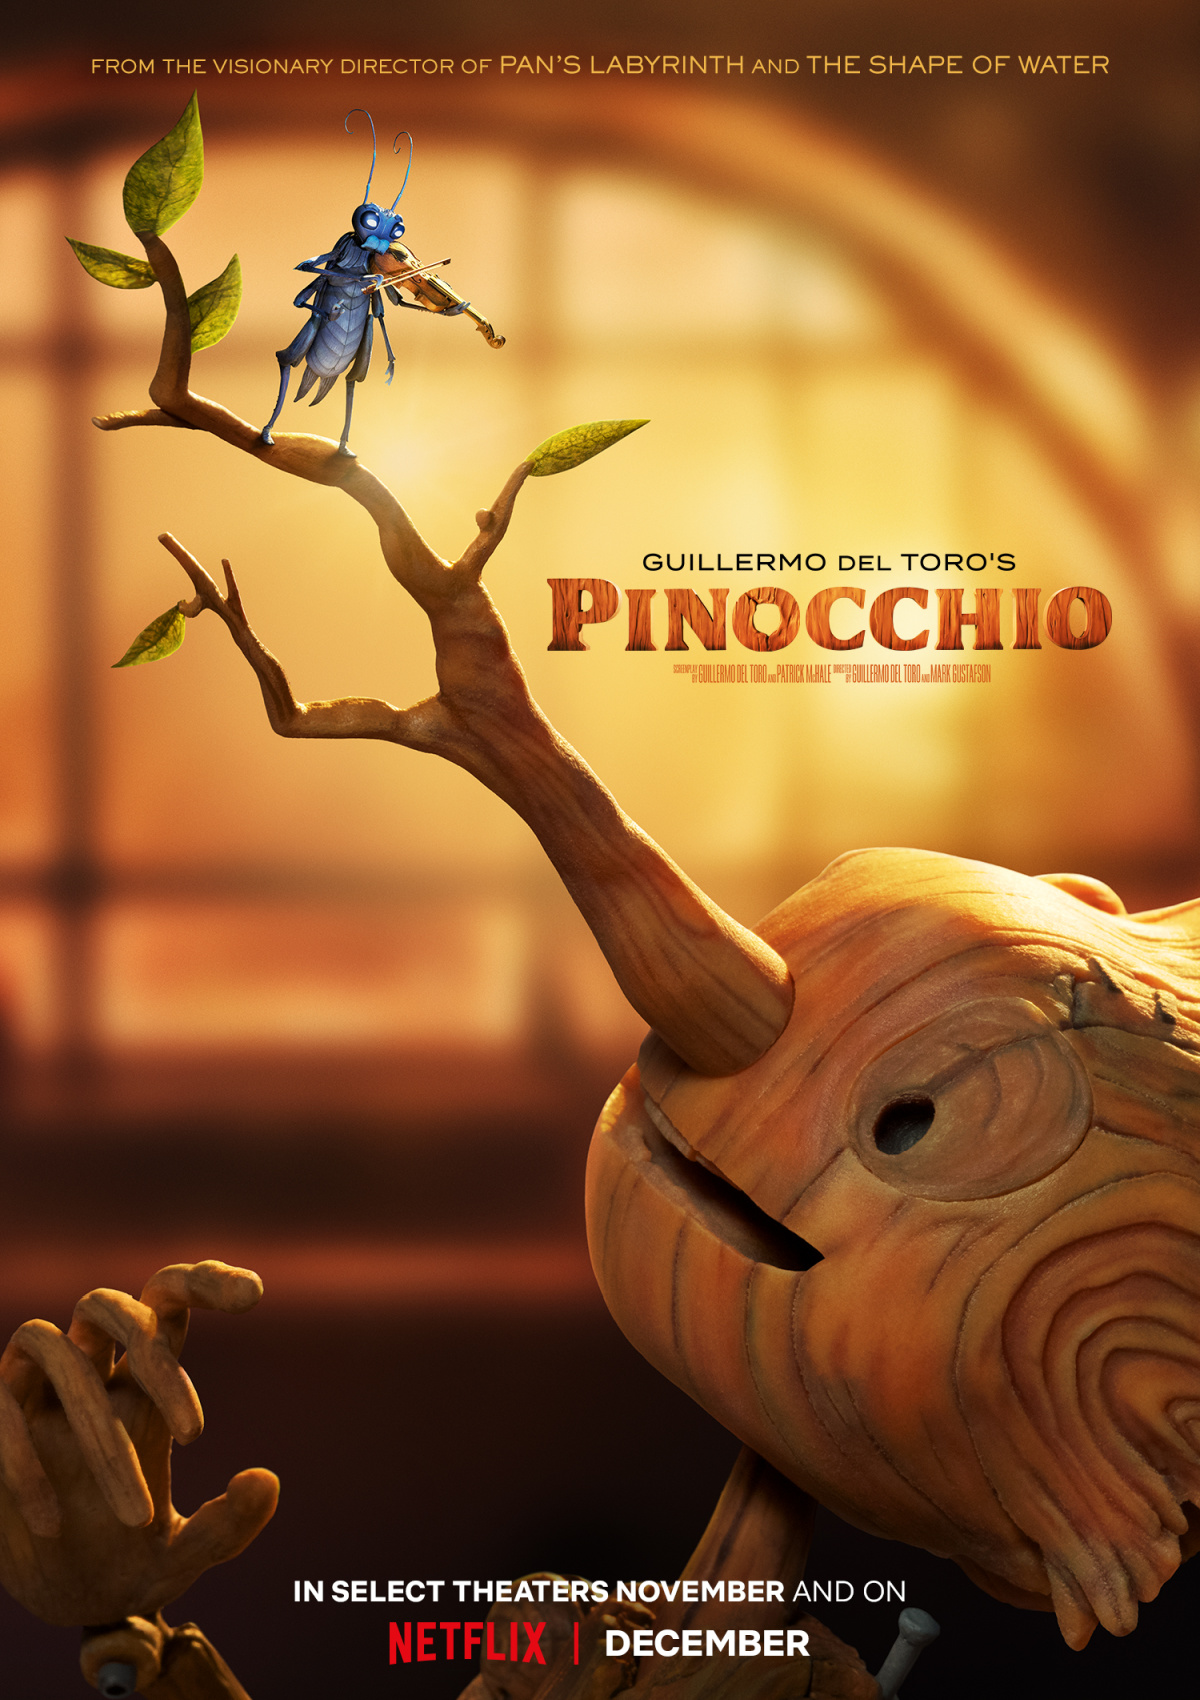 'Pinocchio' is releasing in theaters in November before launching on Netflix in December.